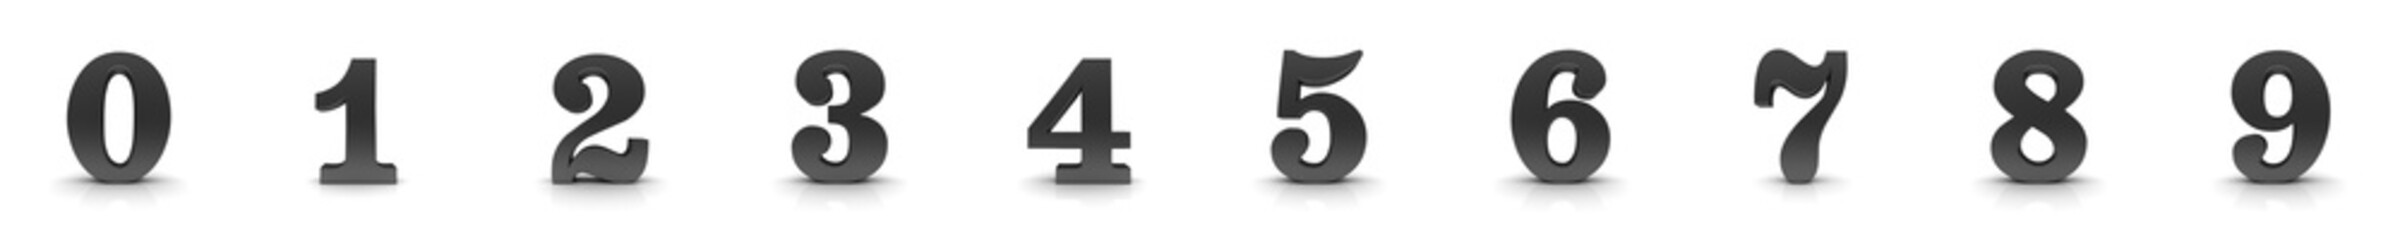 numbers black 3d sign numerals 0 1 2 3 4 5 6 7 8 9 zero one two three four five six seven eight nine